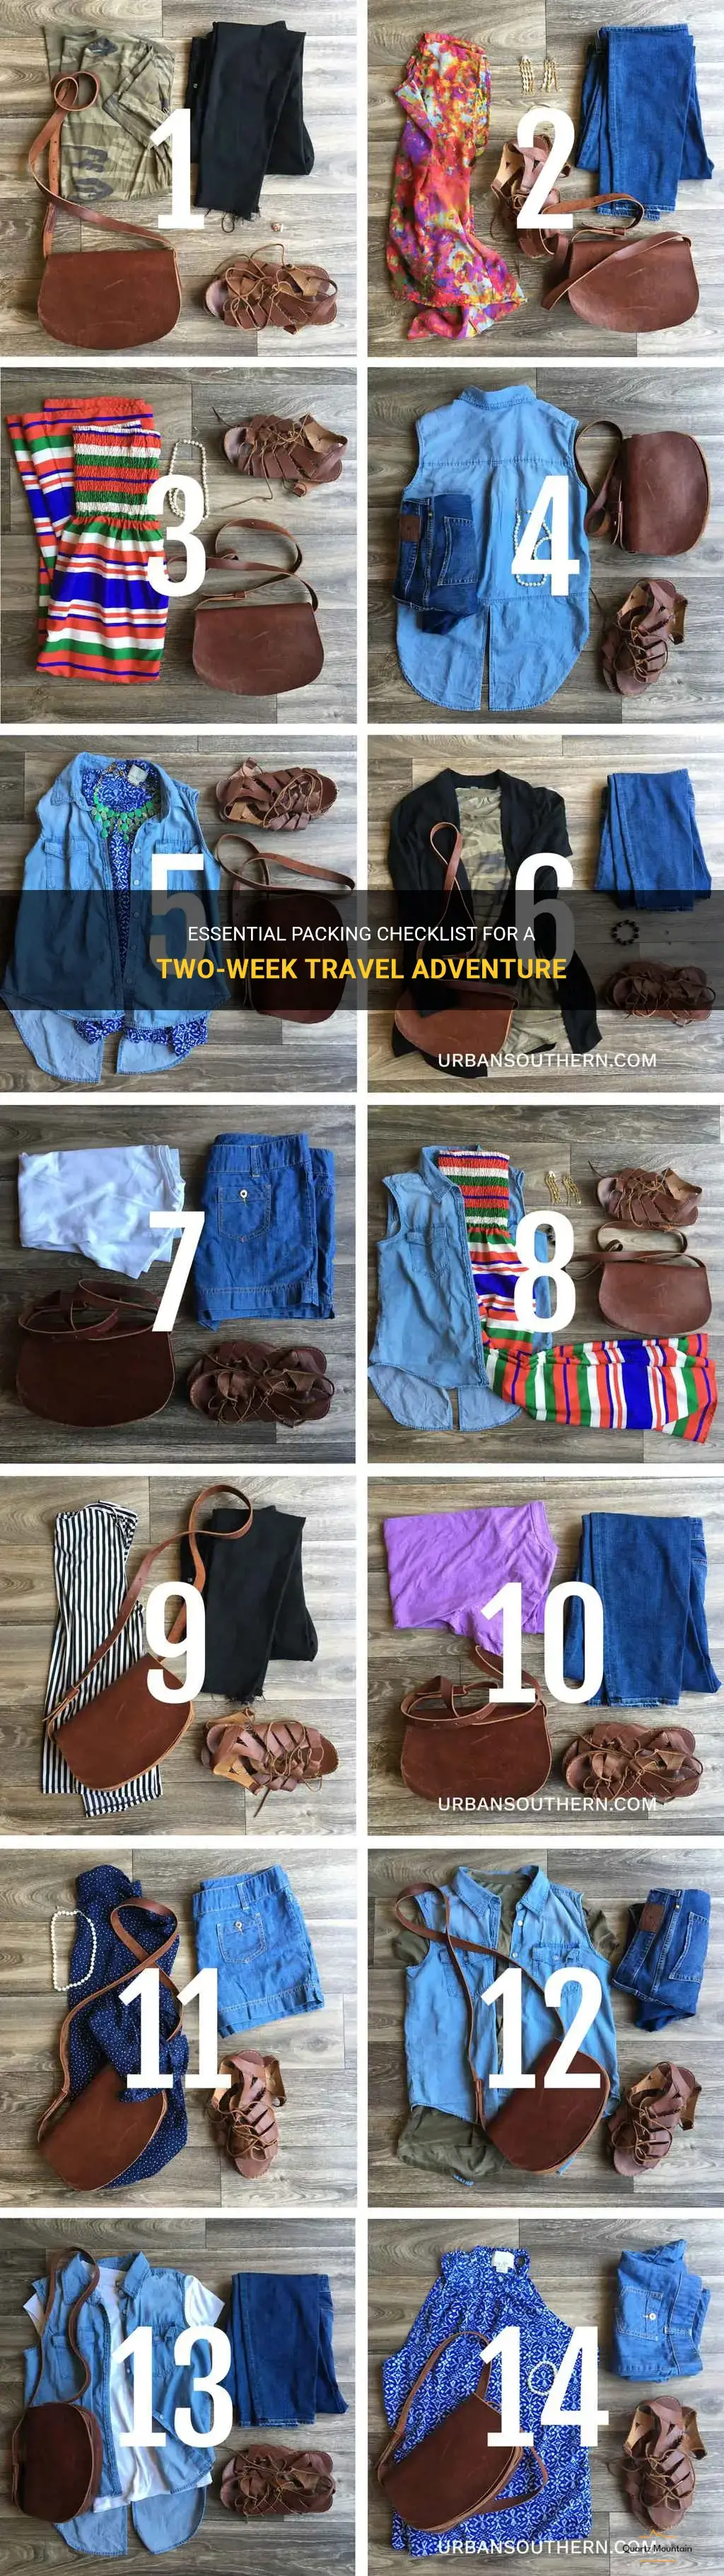 what to pack to travel for two weeks